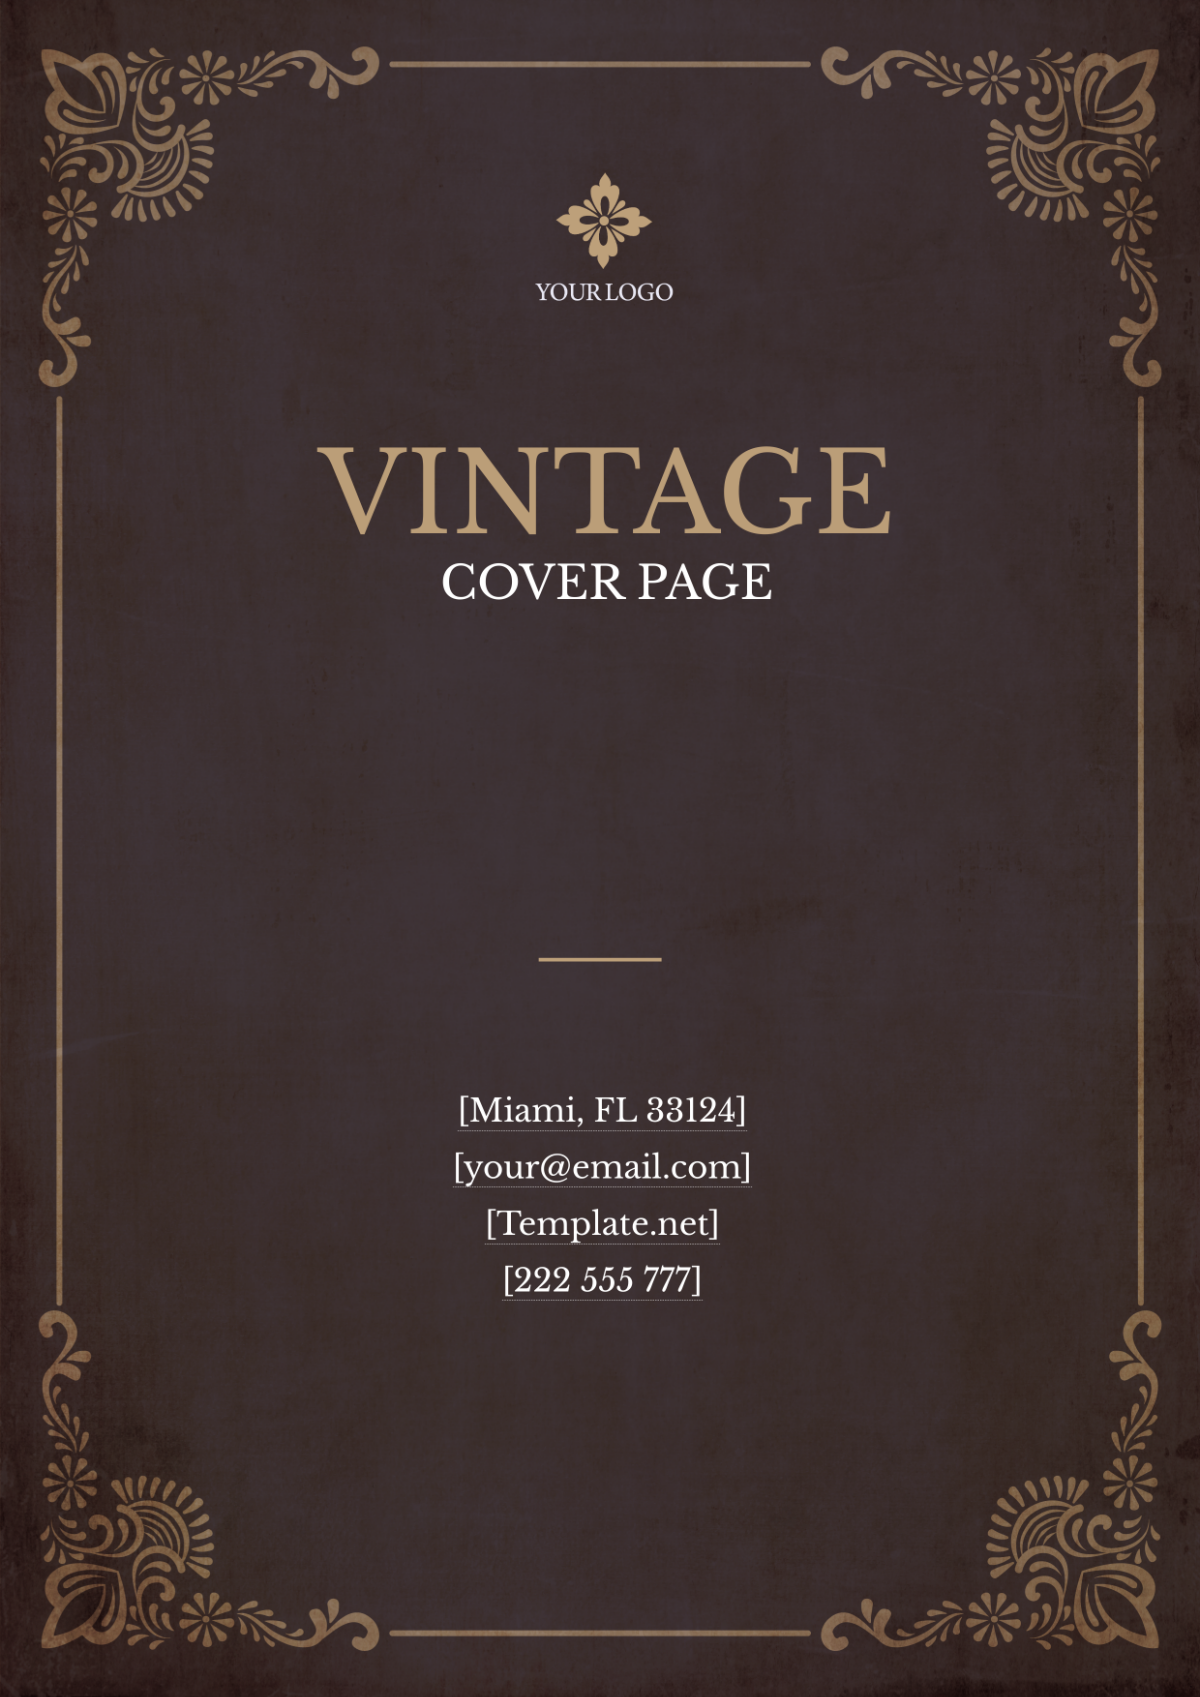 Free Vintage Logo Cover Page Template